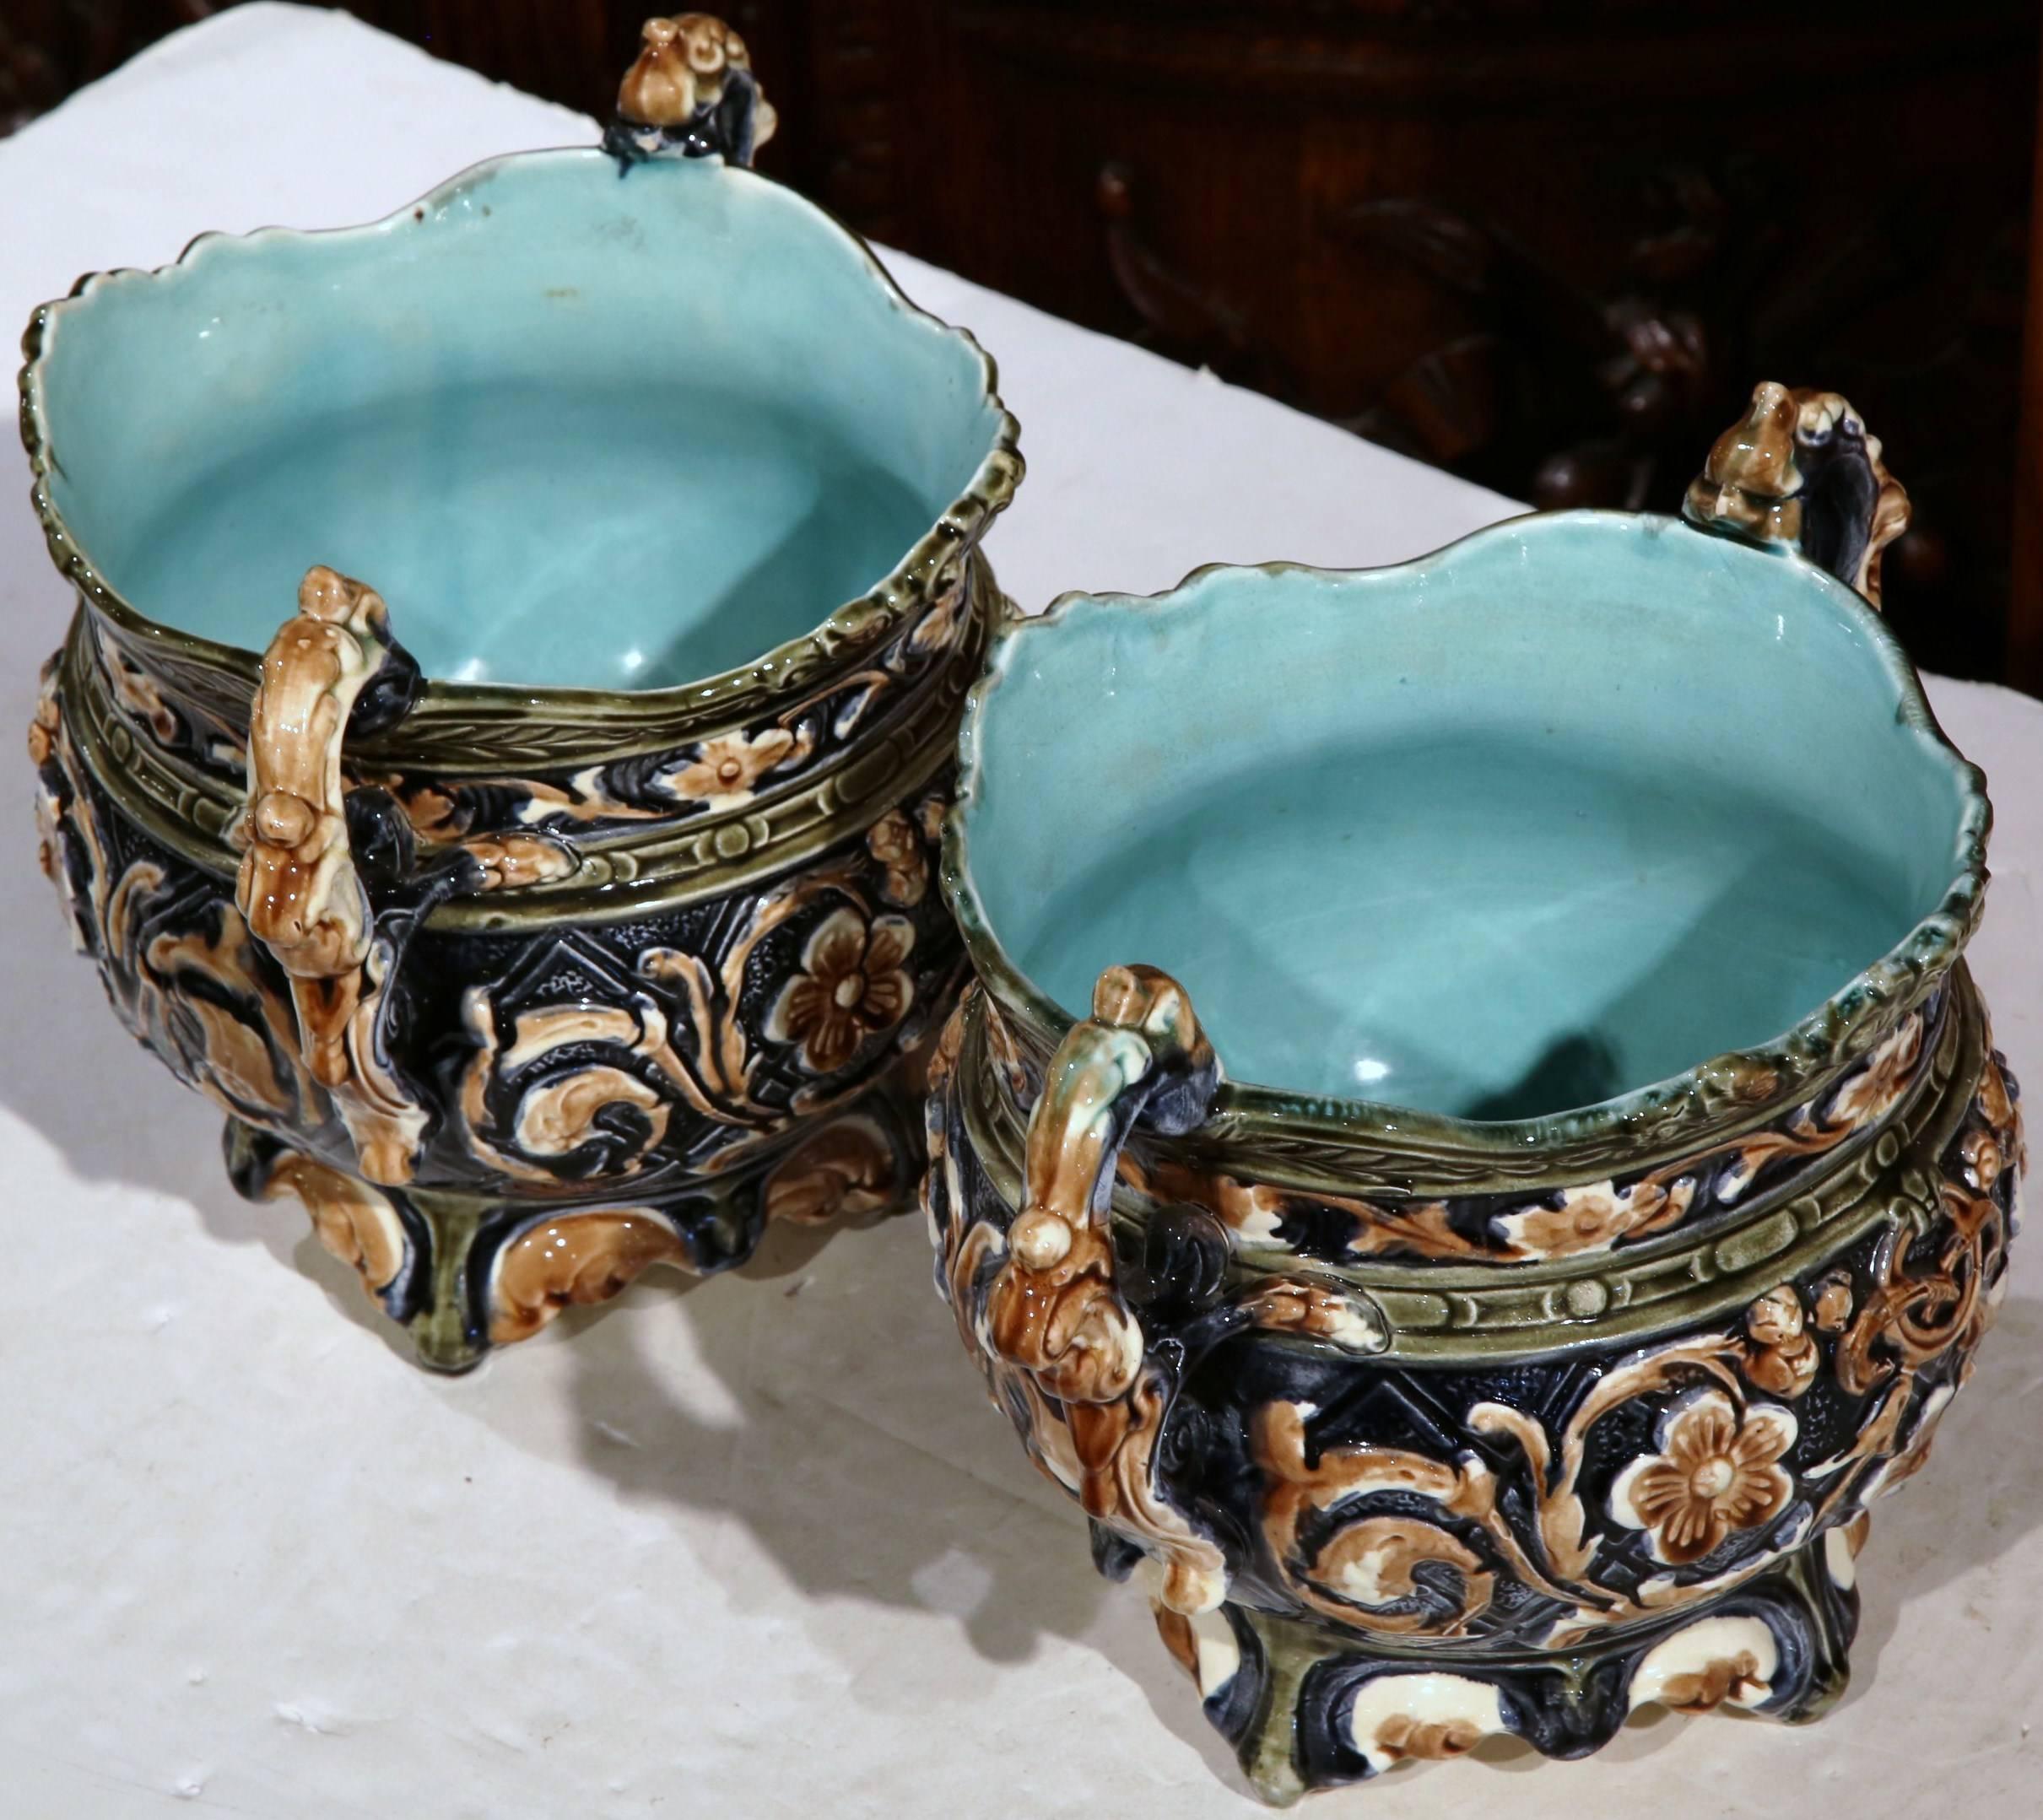 Hand-Crafted Pair of 19th Century French Hand-Painted Barbotine Cache Pots with Flower Motifs